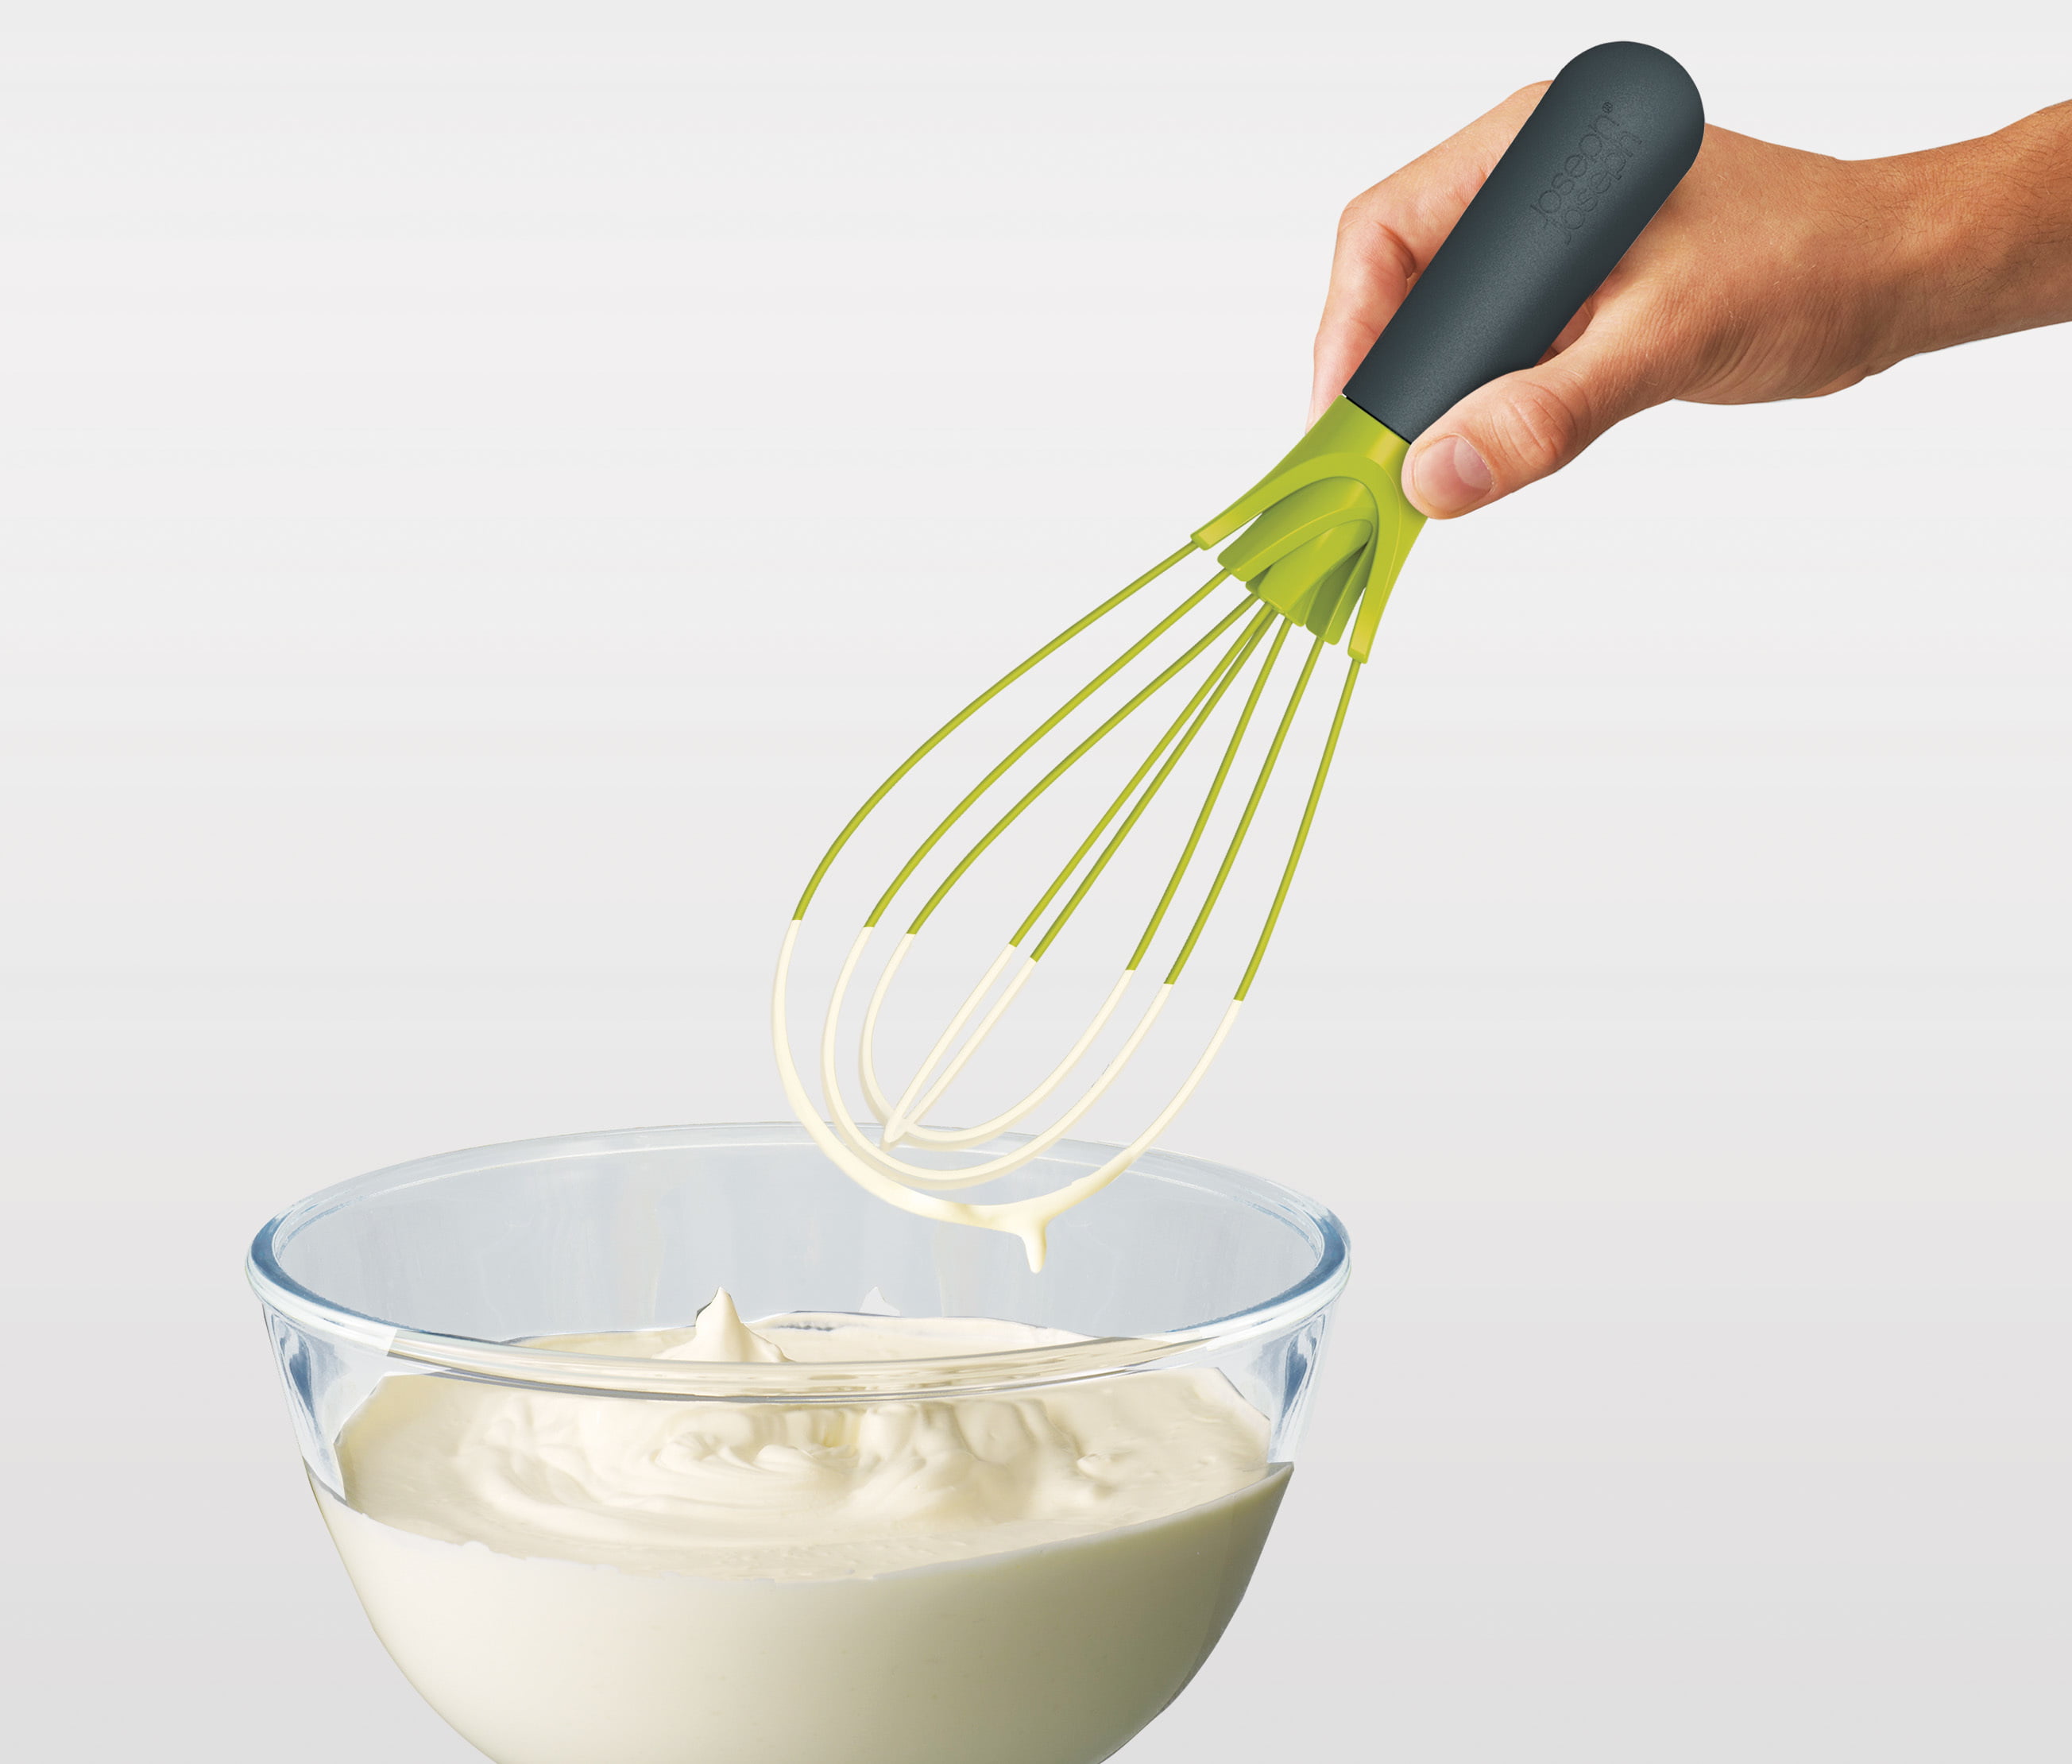 Folding balloon whisk - Three whisks in one